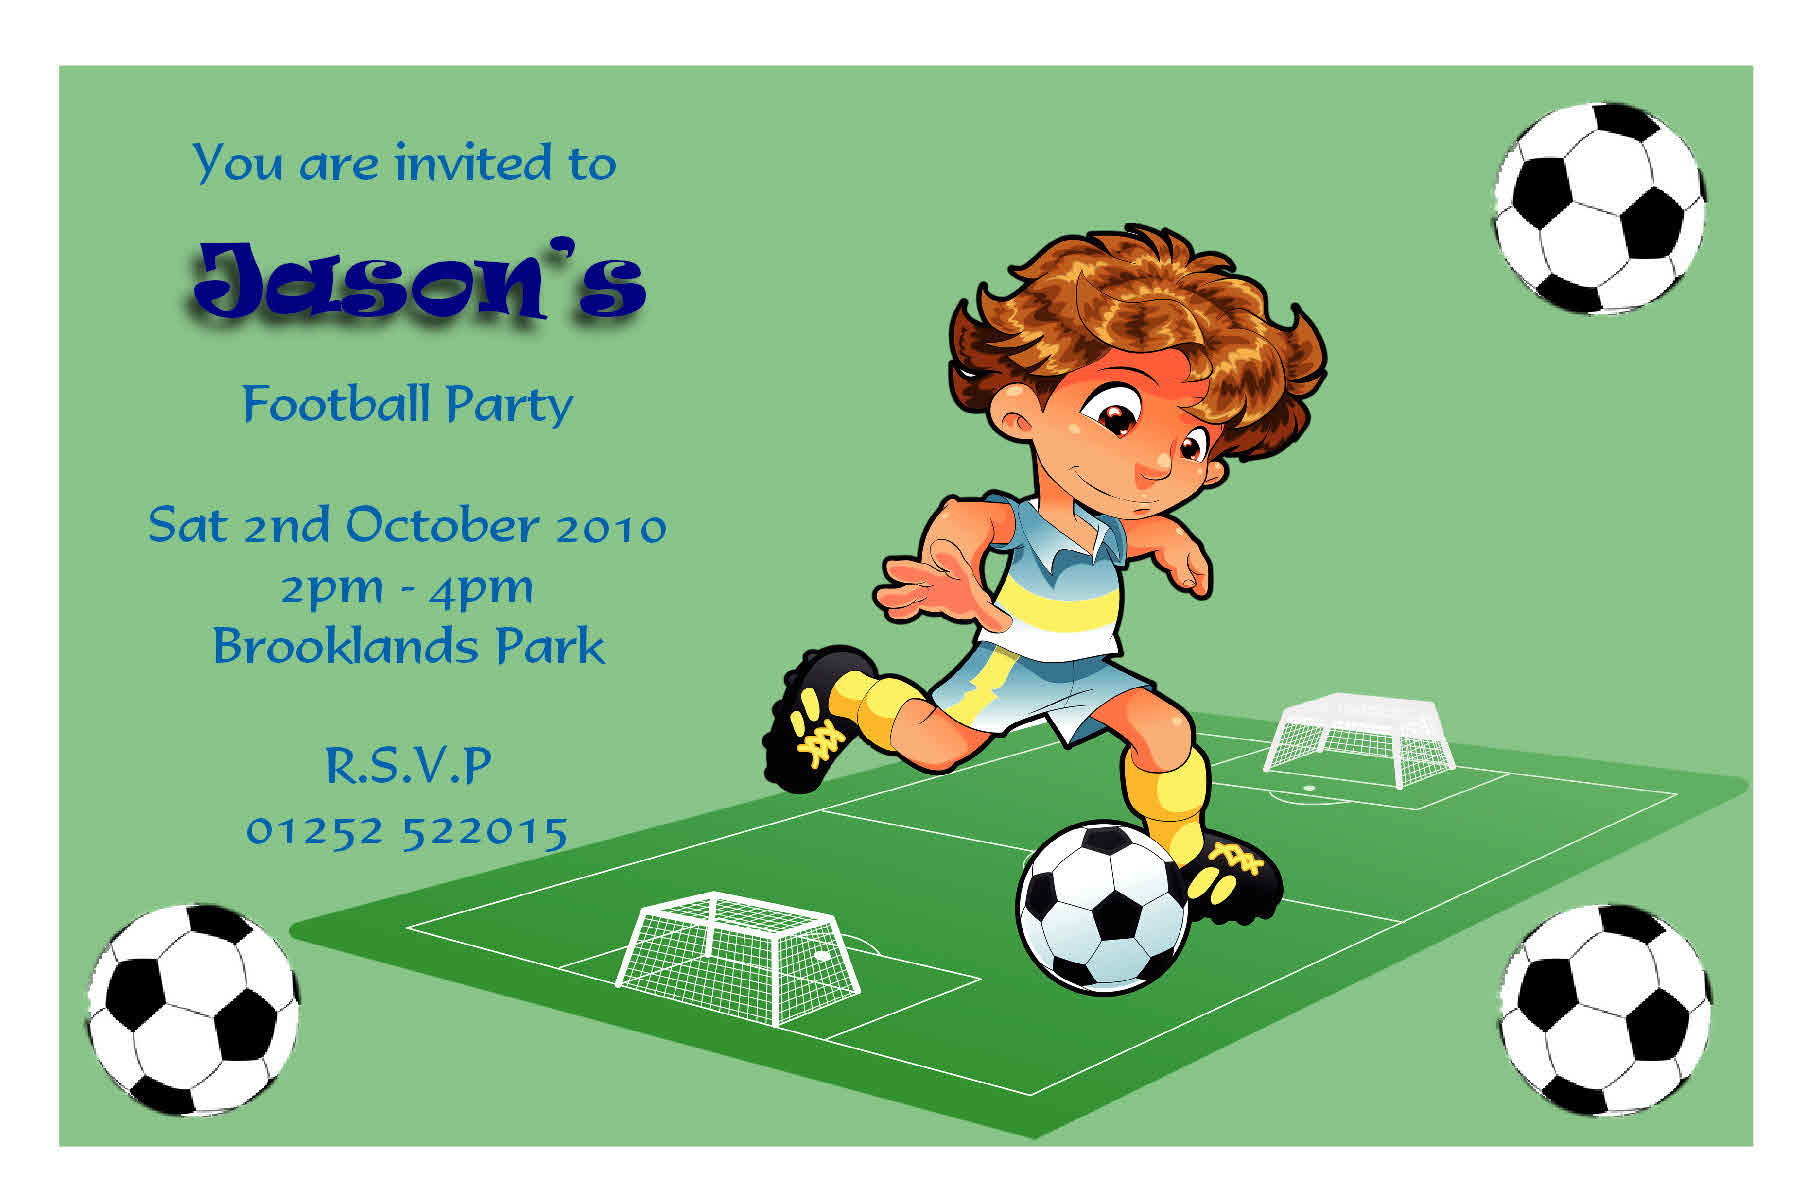 Birthday Party Invitation Template Free Download